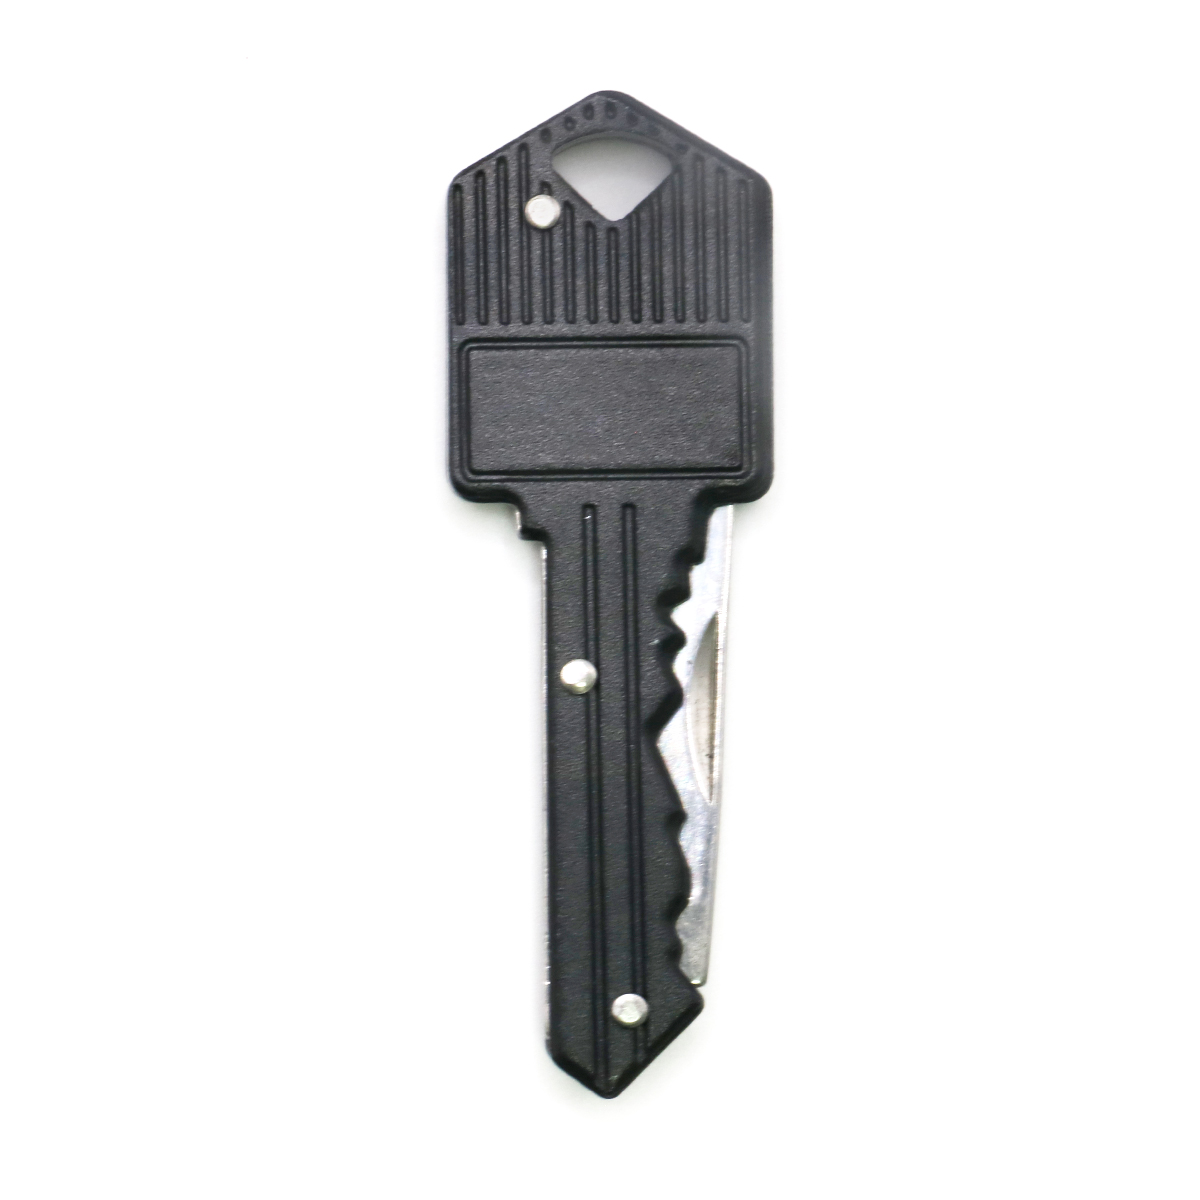 Key cutter for keychains